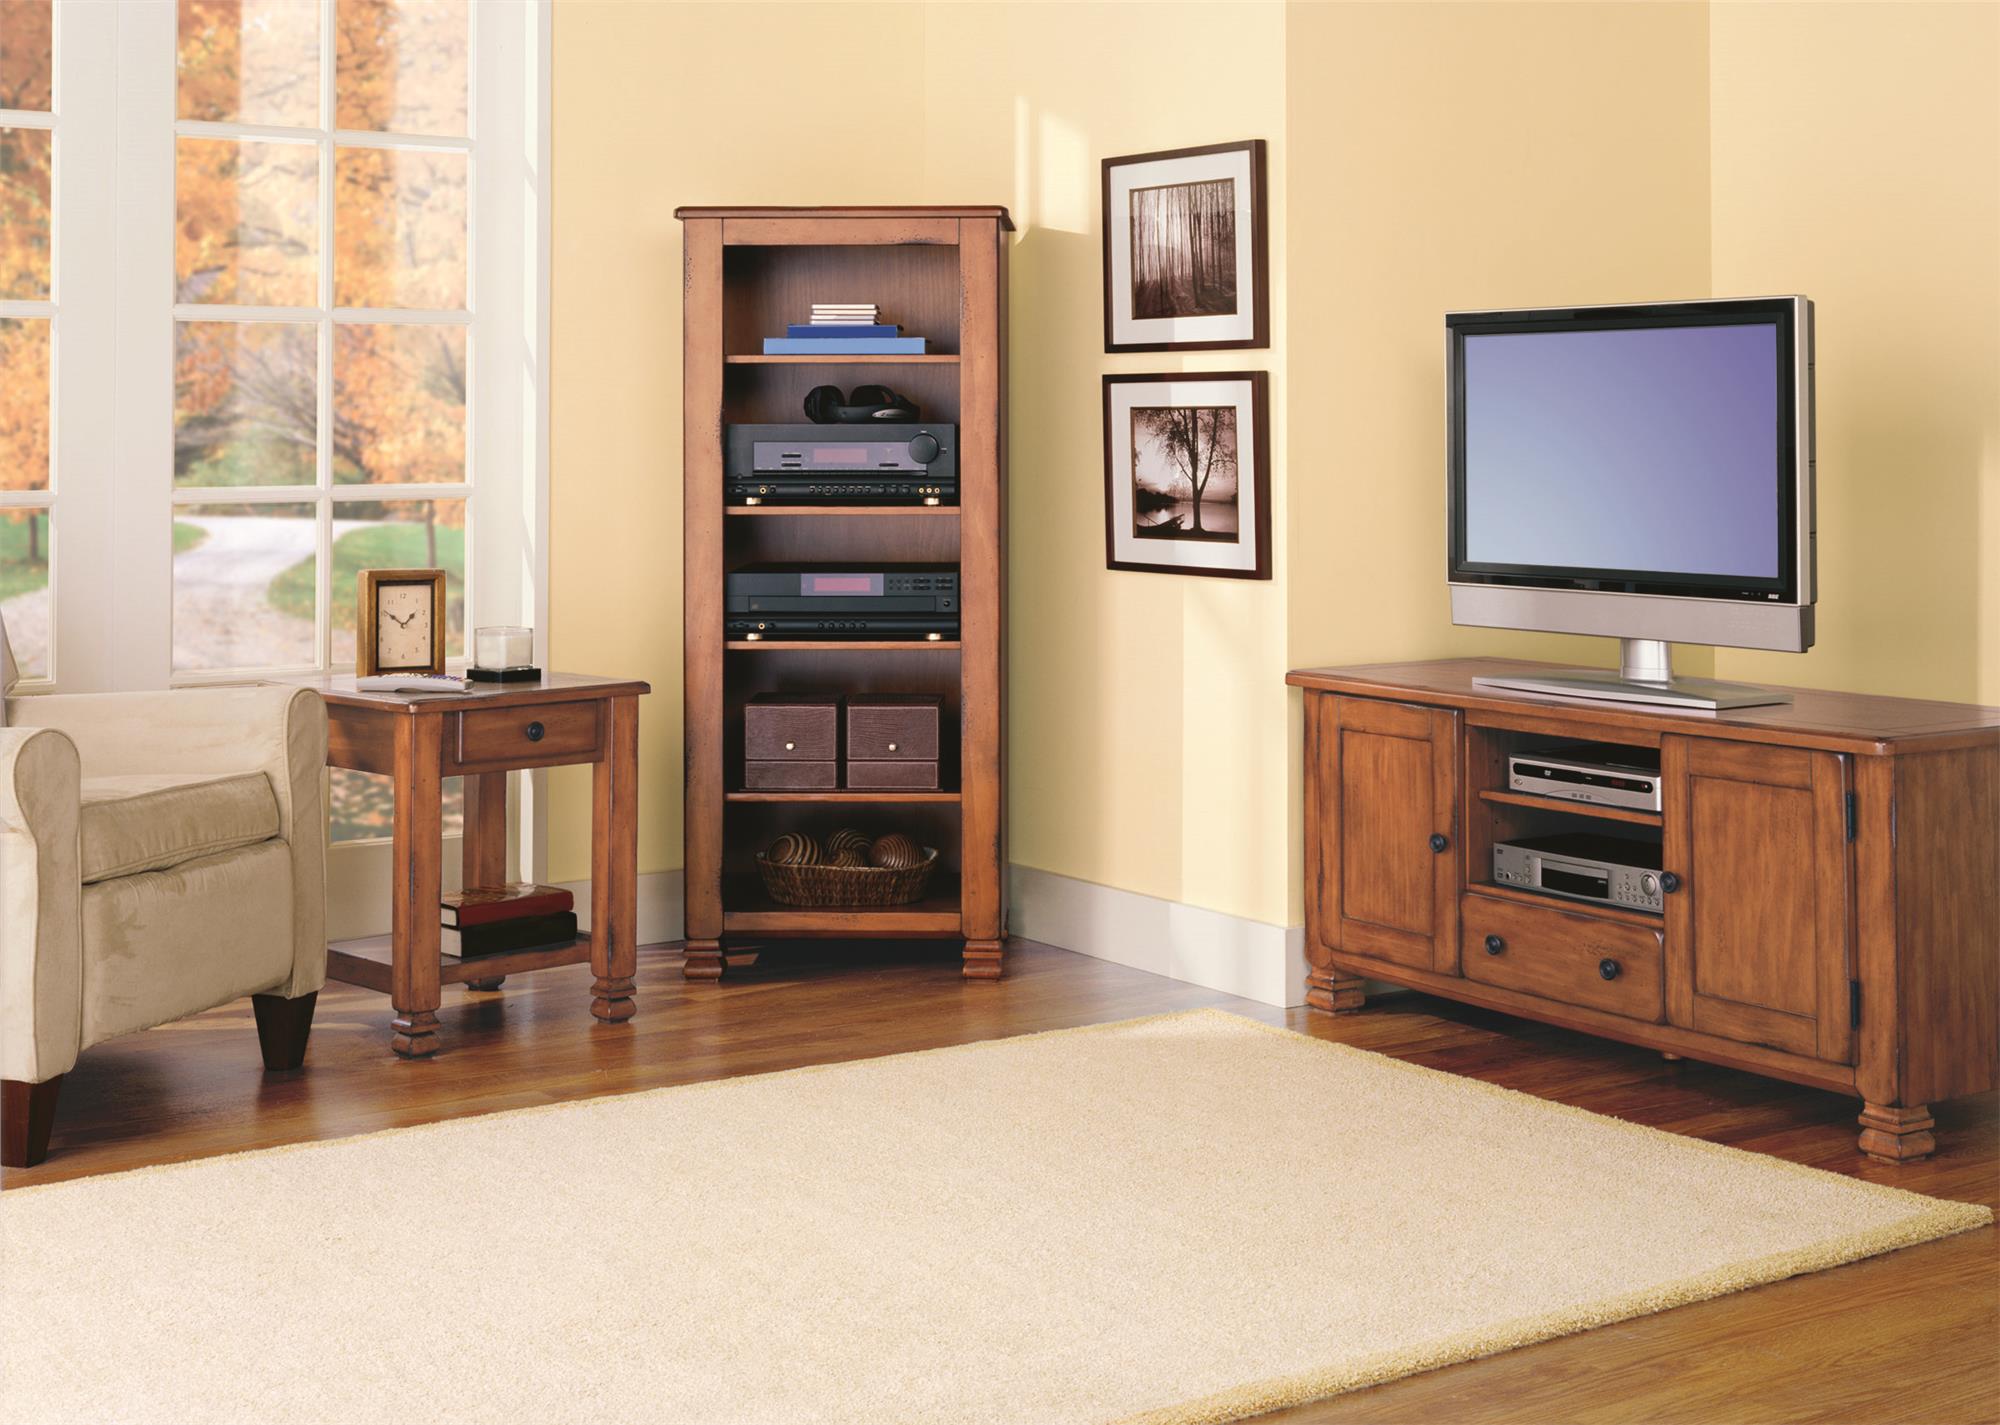 Ameriwood Home Summit Mountain Wood Veneer TV Stand for TVs up to 55" Wide, Medium Brown - image 4 of 9